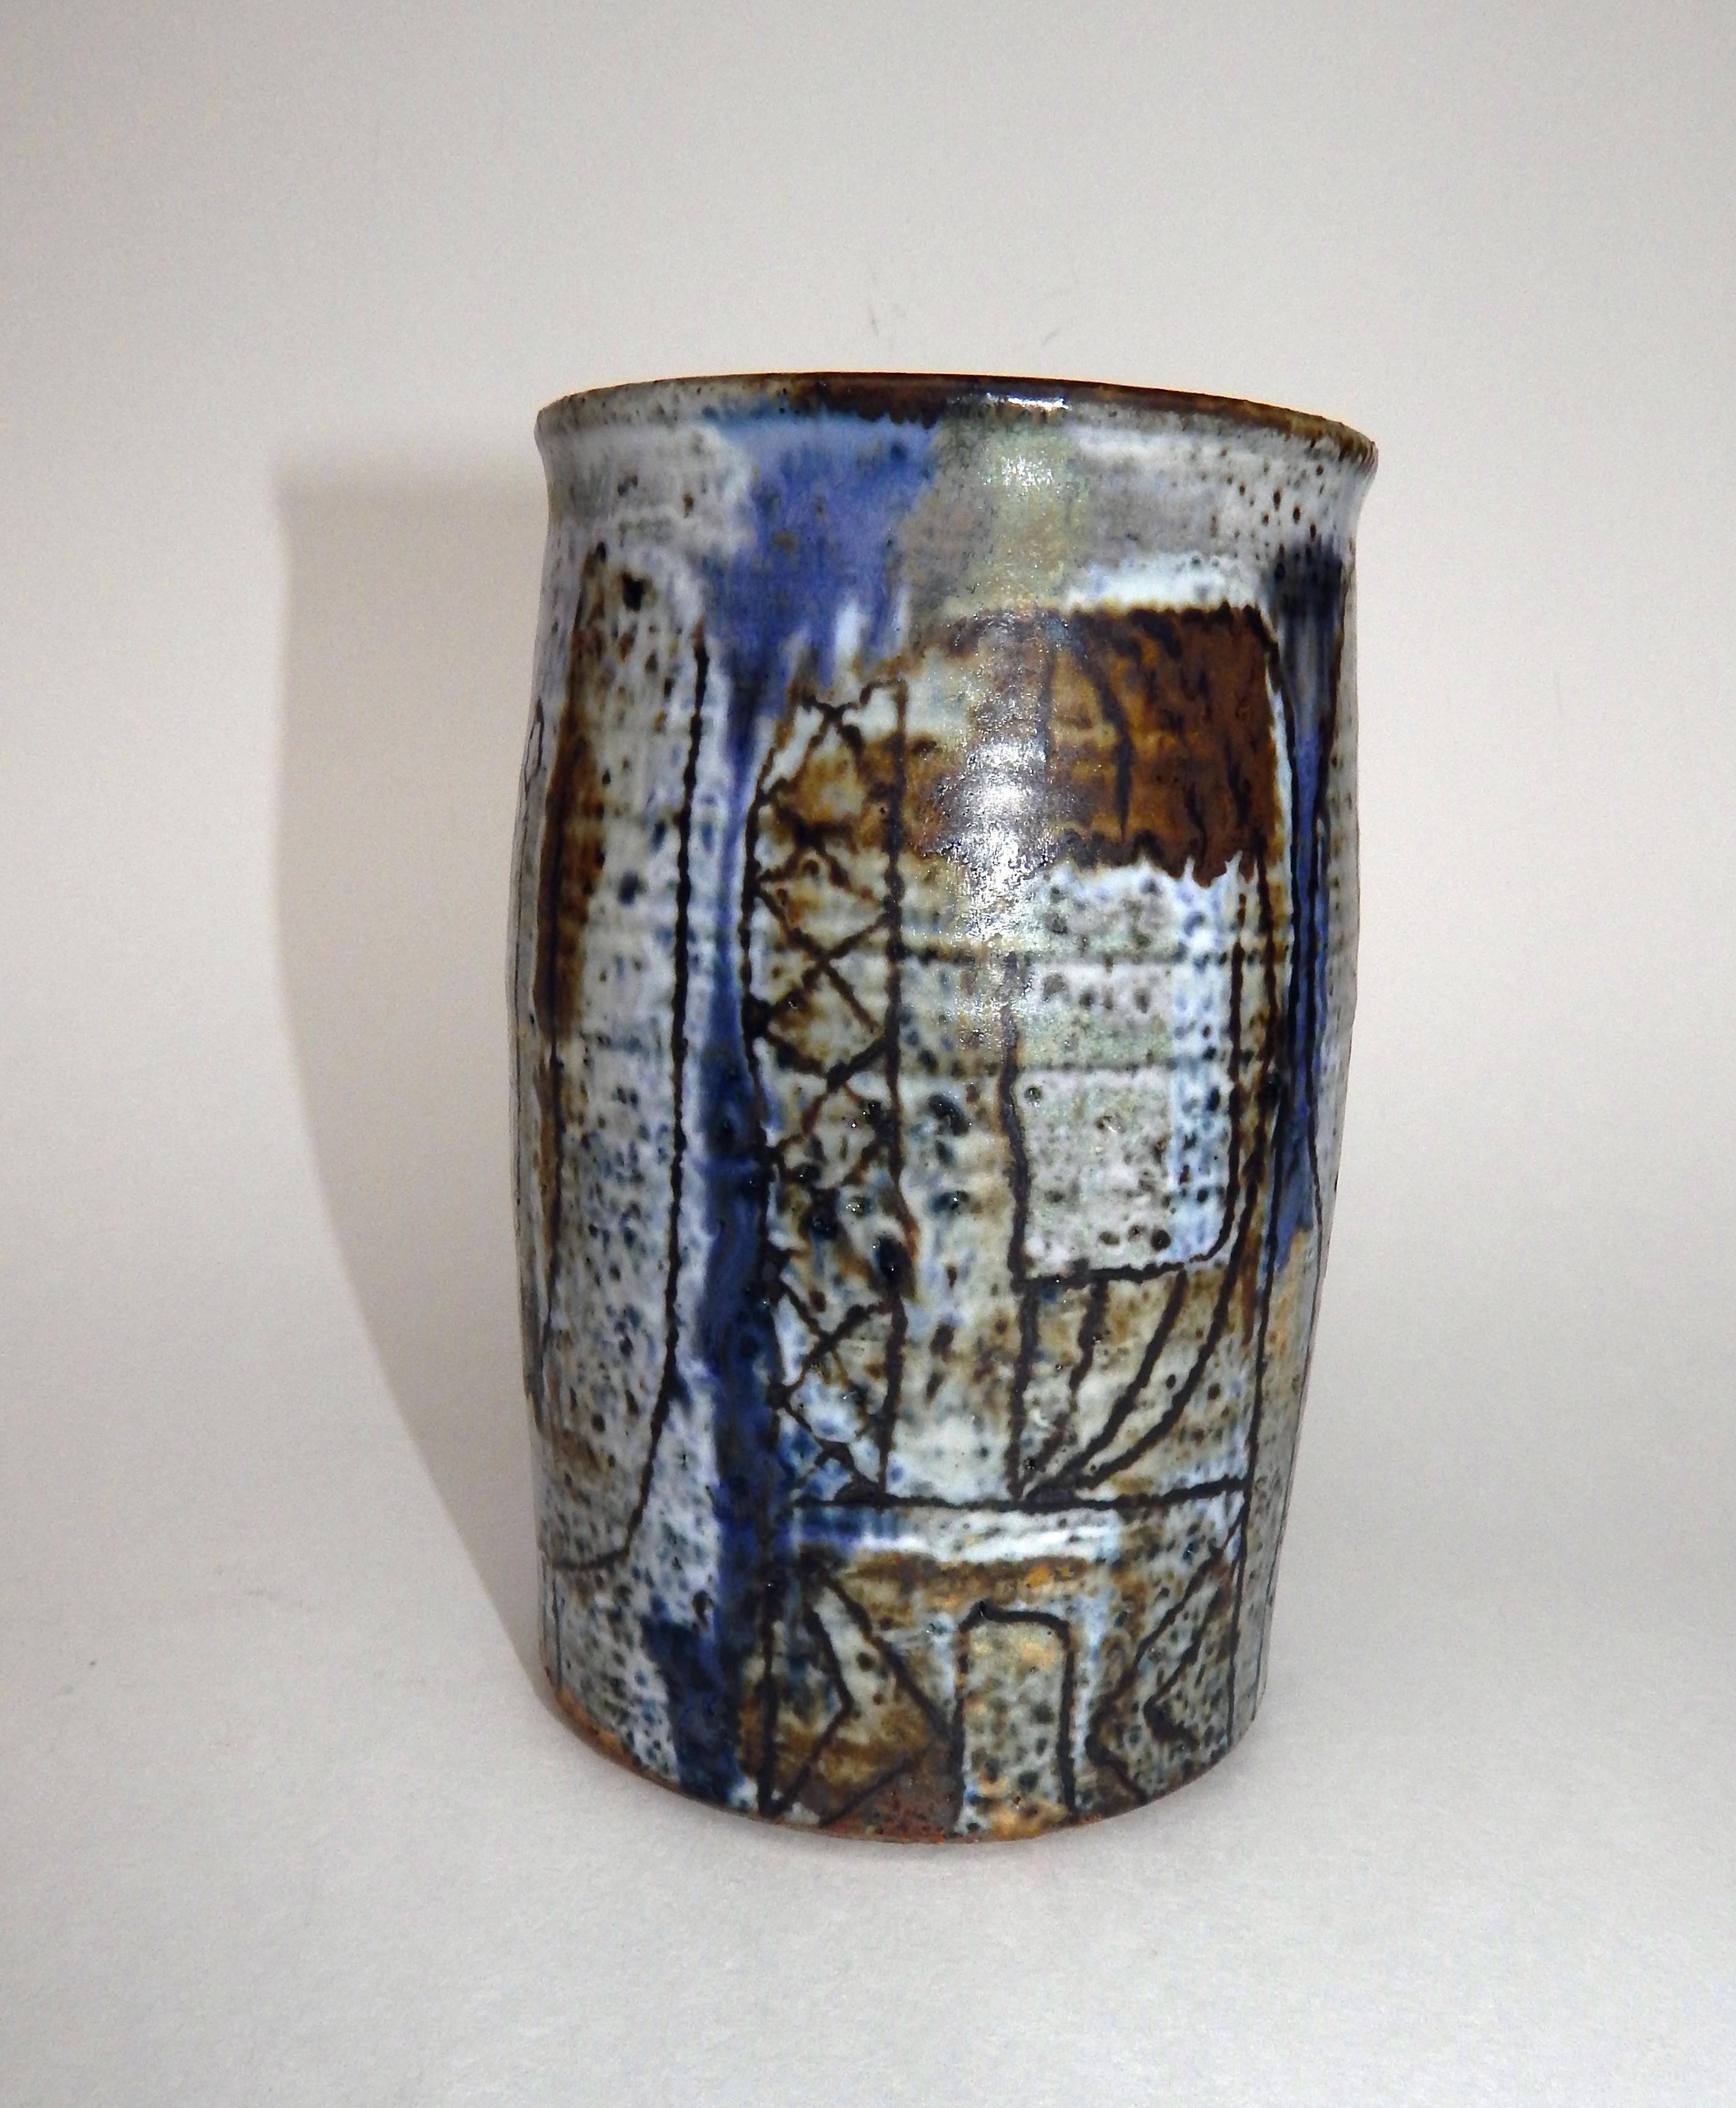 Abstract Sgraffito design Studio Pottery Vase by Louis Raynor (1917-1999).
Monogram signature on the Bottom.
Measures: 5 3/4